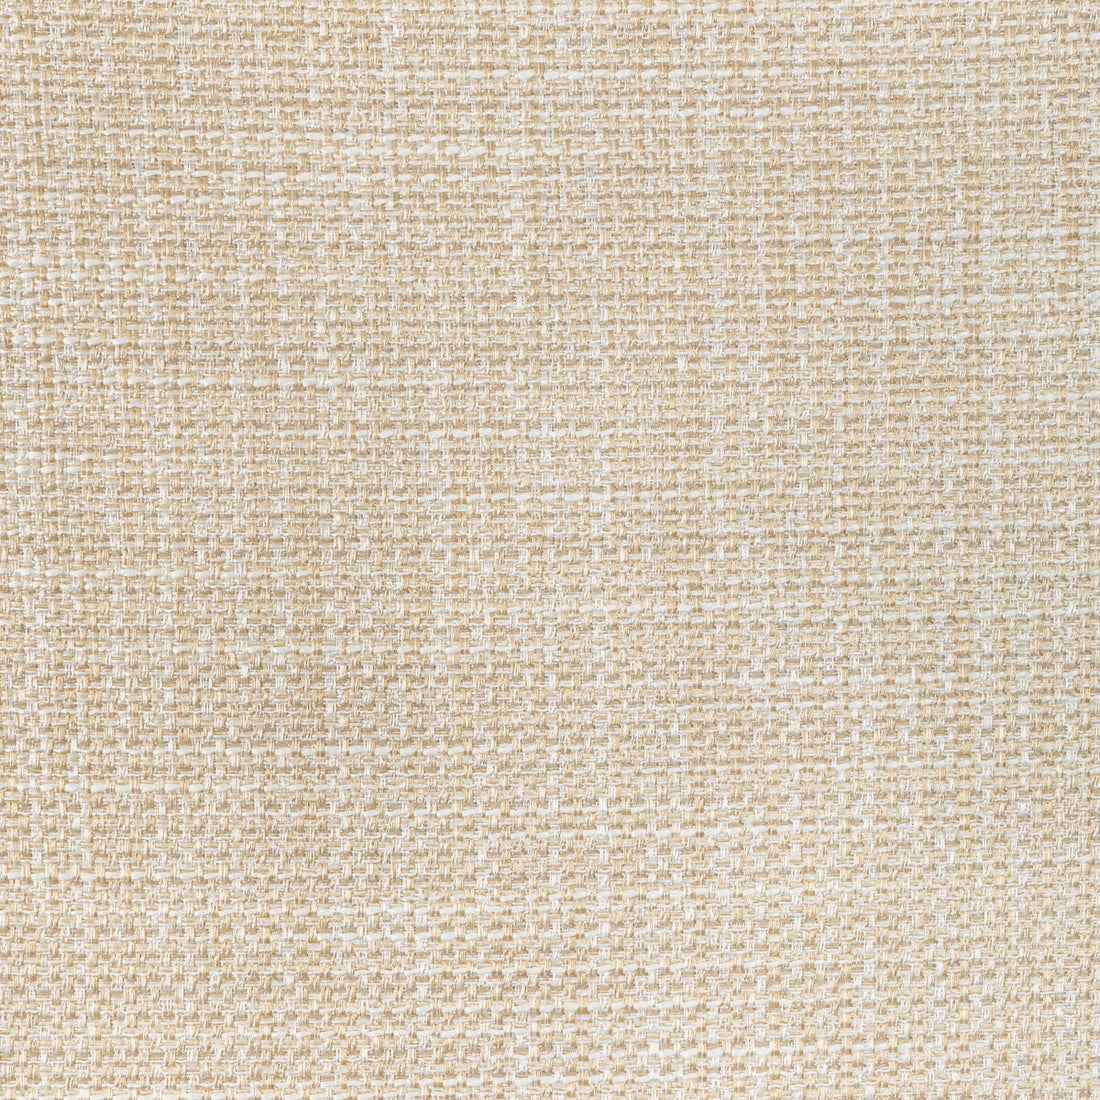 Luma Texture fabric in sahara color - pattern 4947.1161.0 - by Kravet Contract in the Fr Window Luma Texture collection